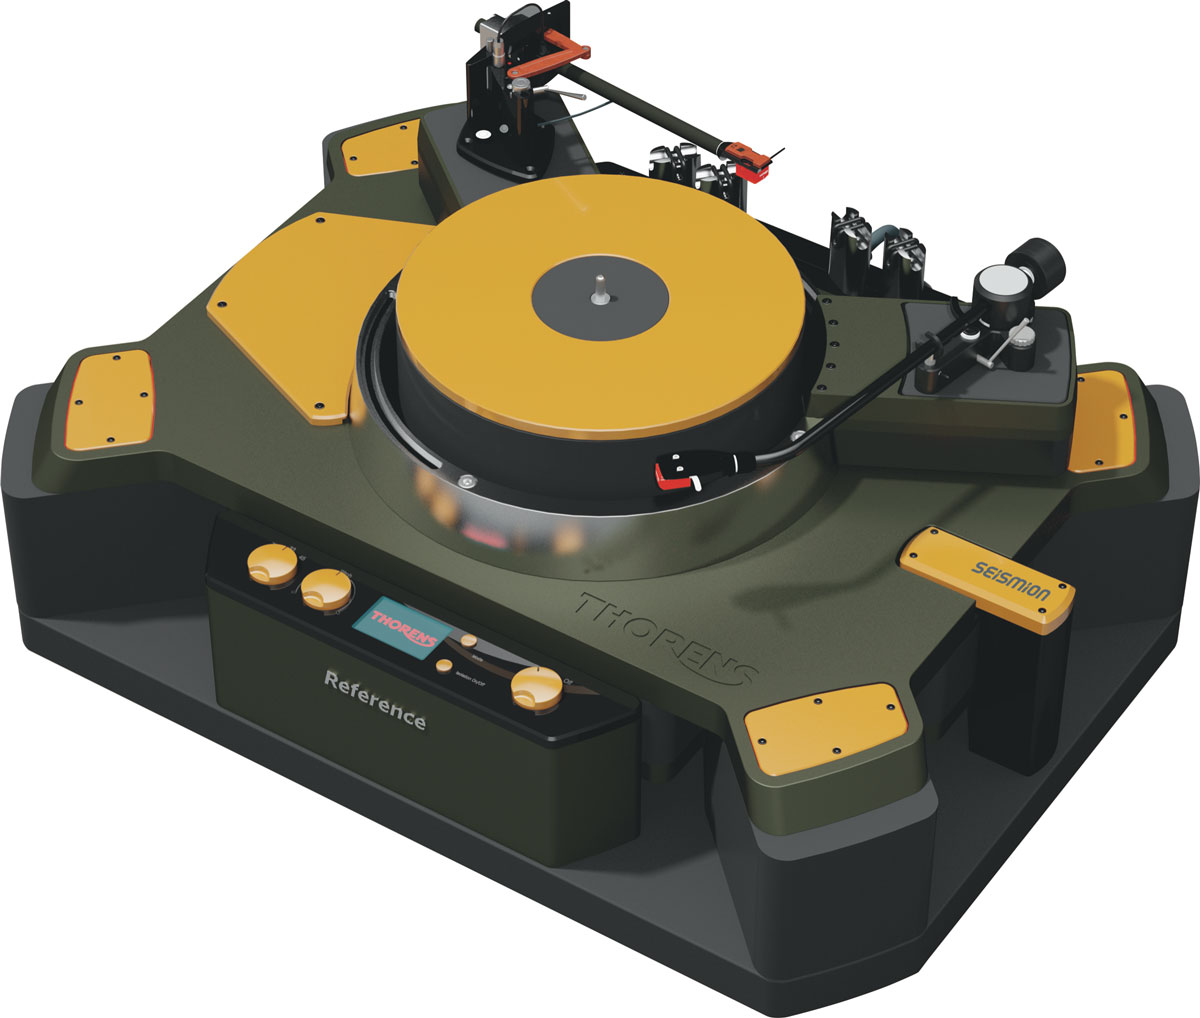 Thorens New Reference green gold front